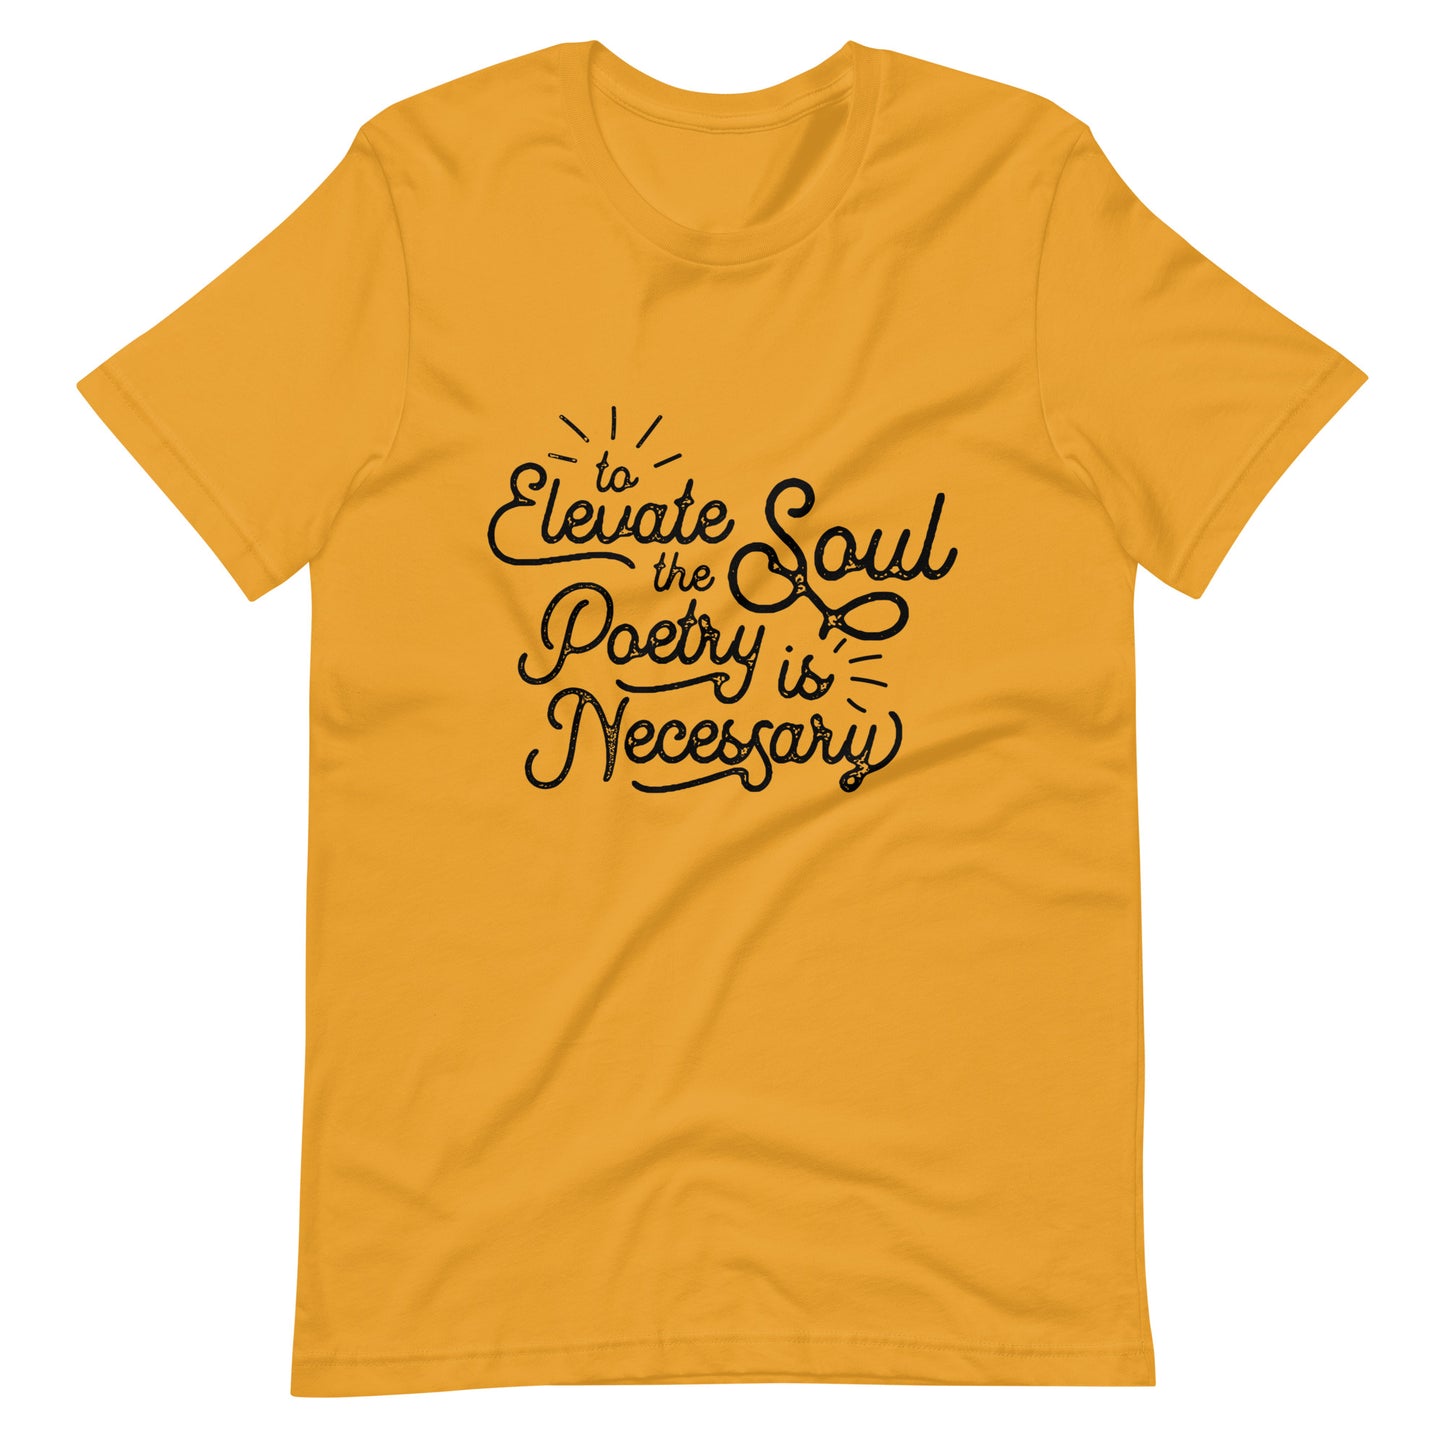 To Elevate the Soul Edgar Allan Poe Quote - Men's t-shirt - Mustard Front